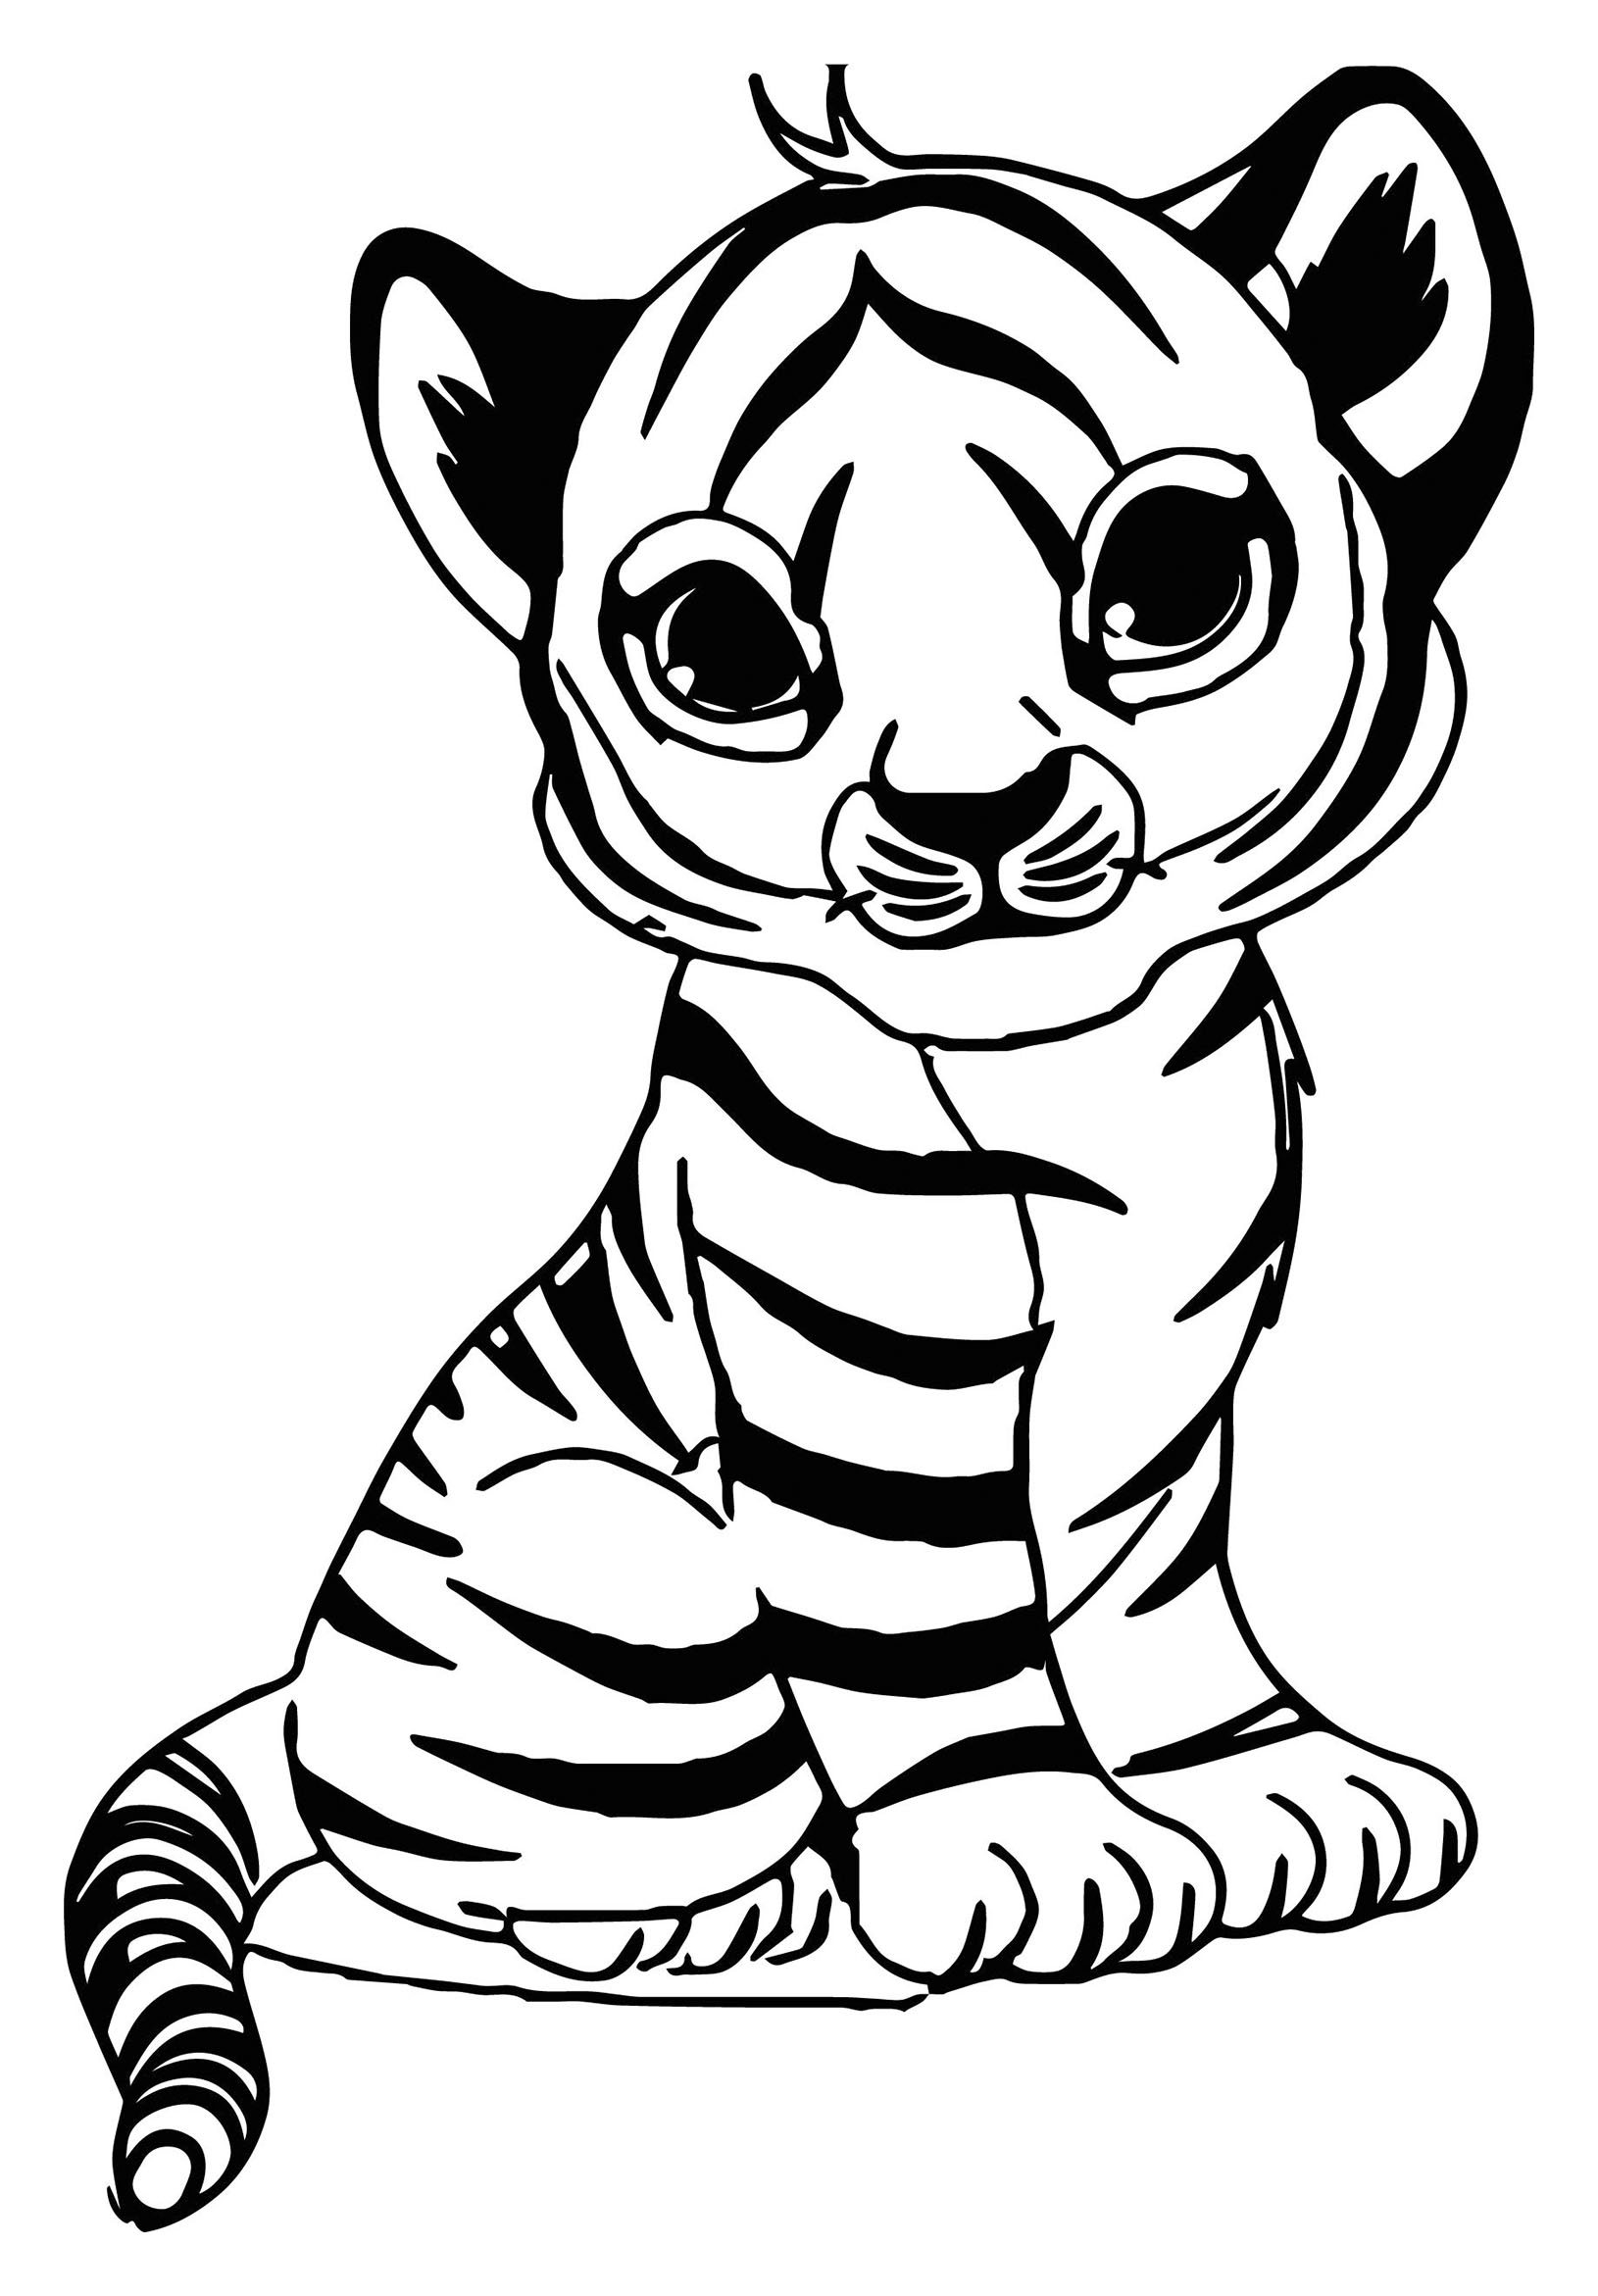 Download Tigers to print for free - Tigers Kids Coloring Pages